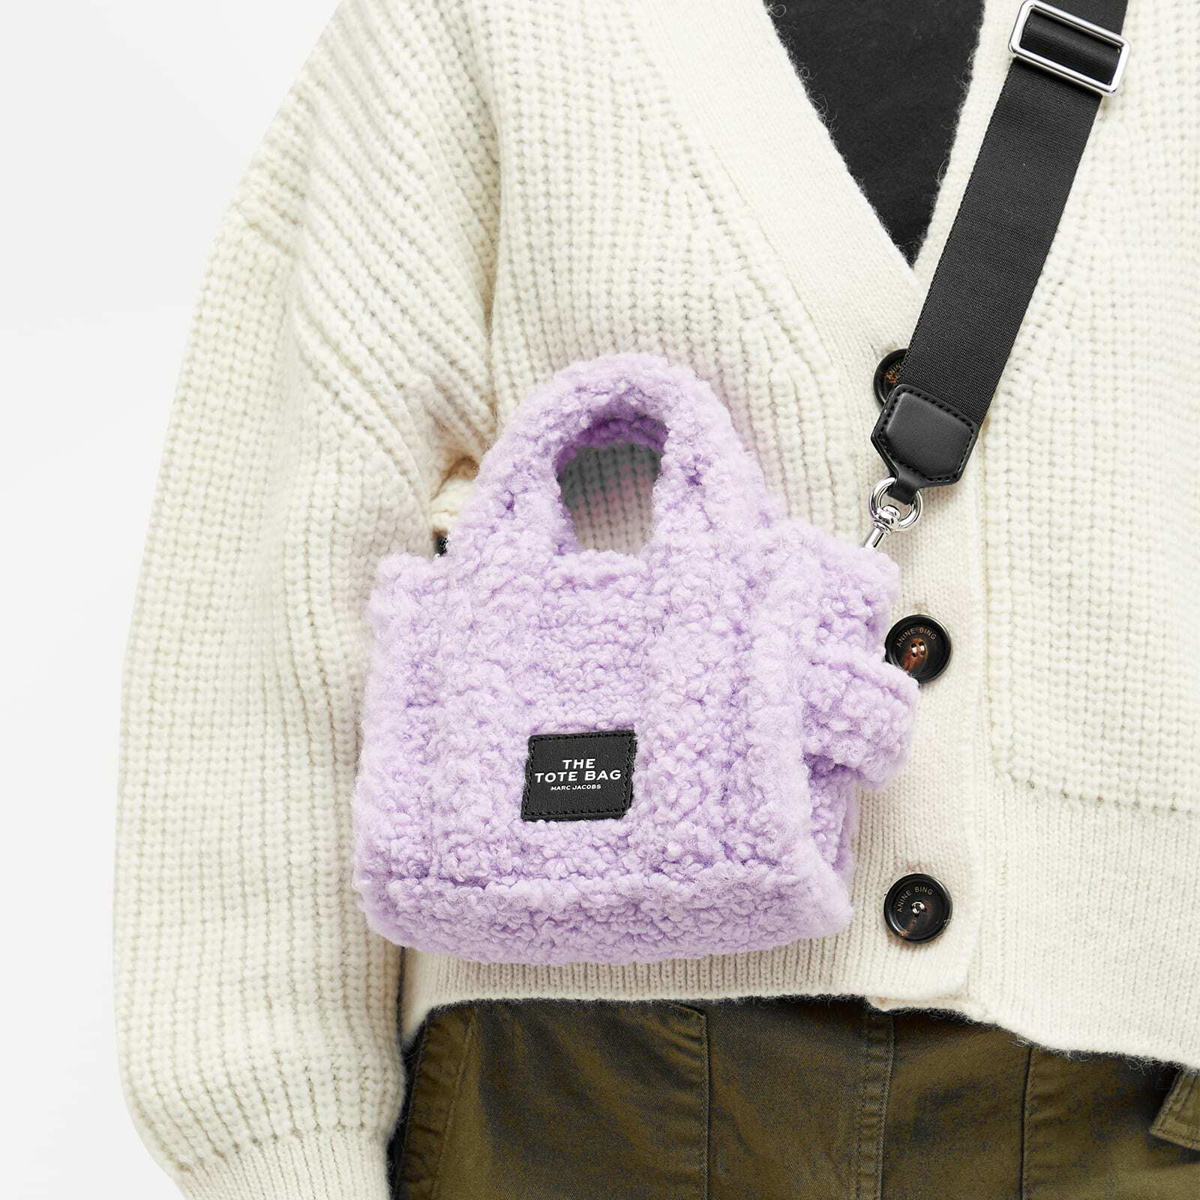 Marc Jacobs The Teddy Mini Tote Bag curated on LTK